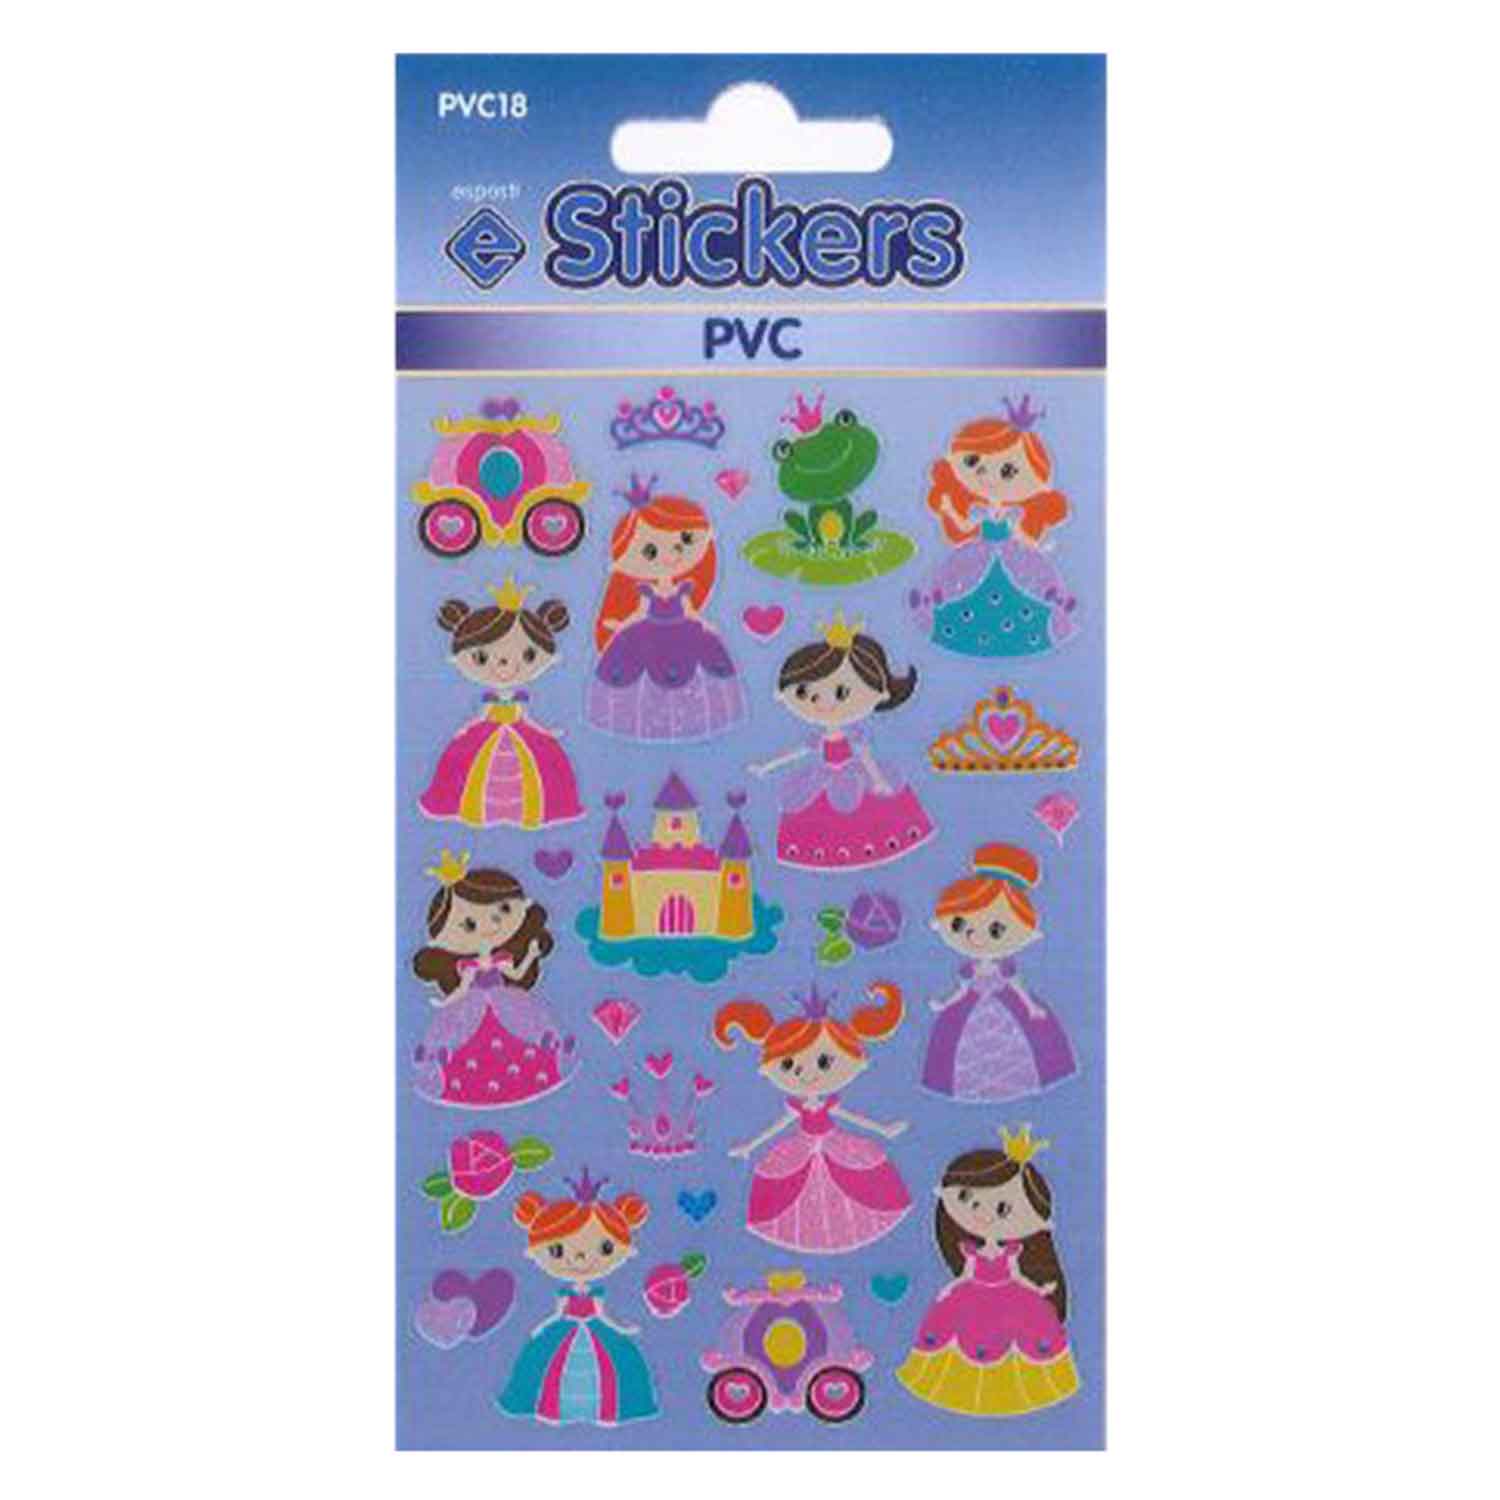 Princess Self Adhesive PVC Novelty Stickers - Pack of 10